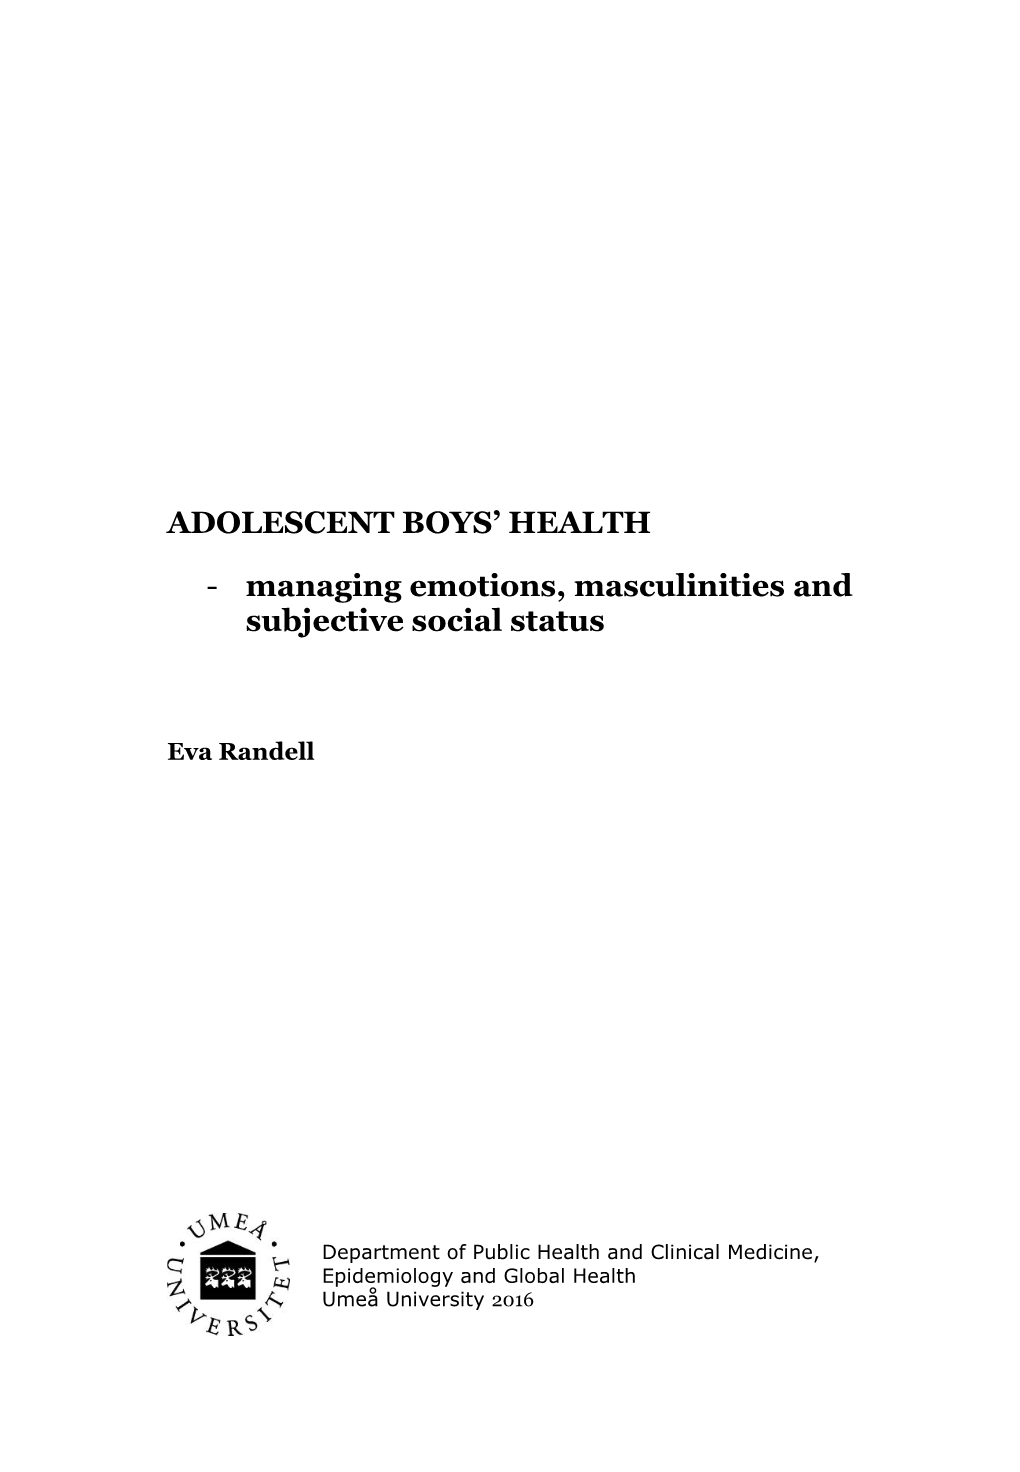 Adolescent Boys' Health and Related Factors